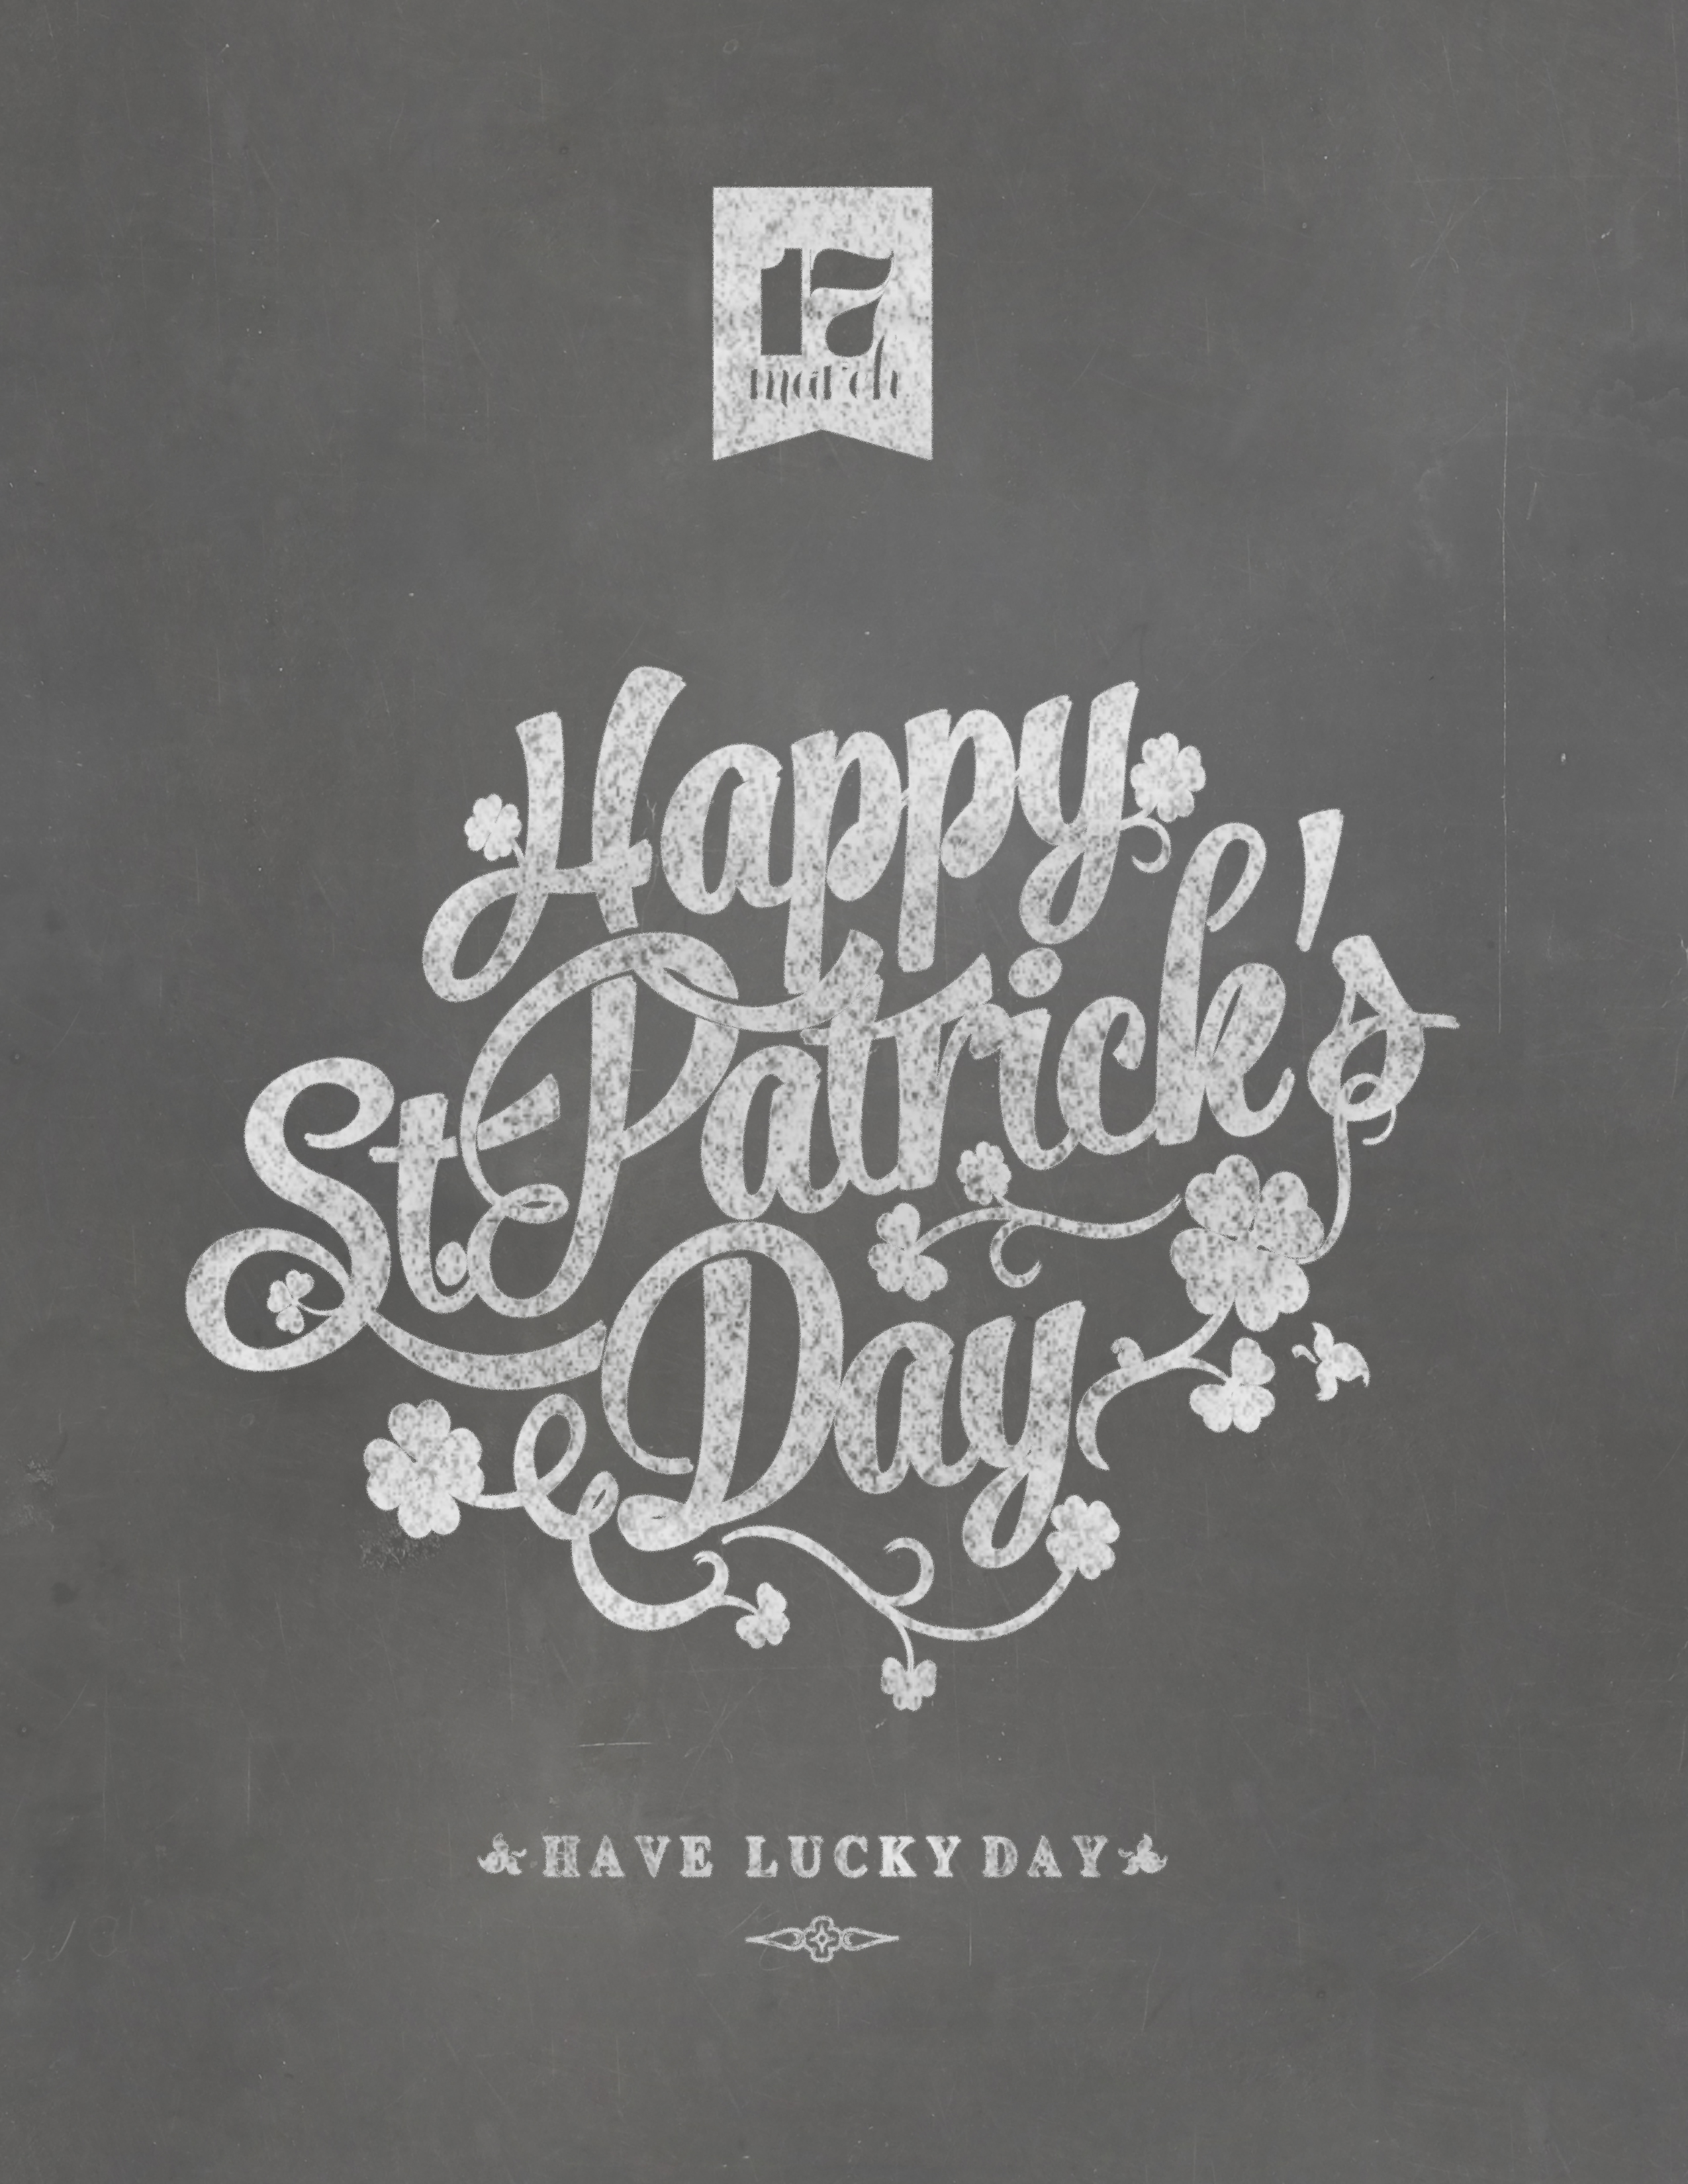 free-st-patrick-s-day-printable-chalkboard-wall-art-the-graffical-muse